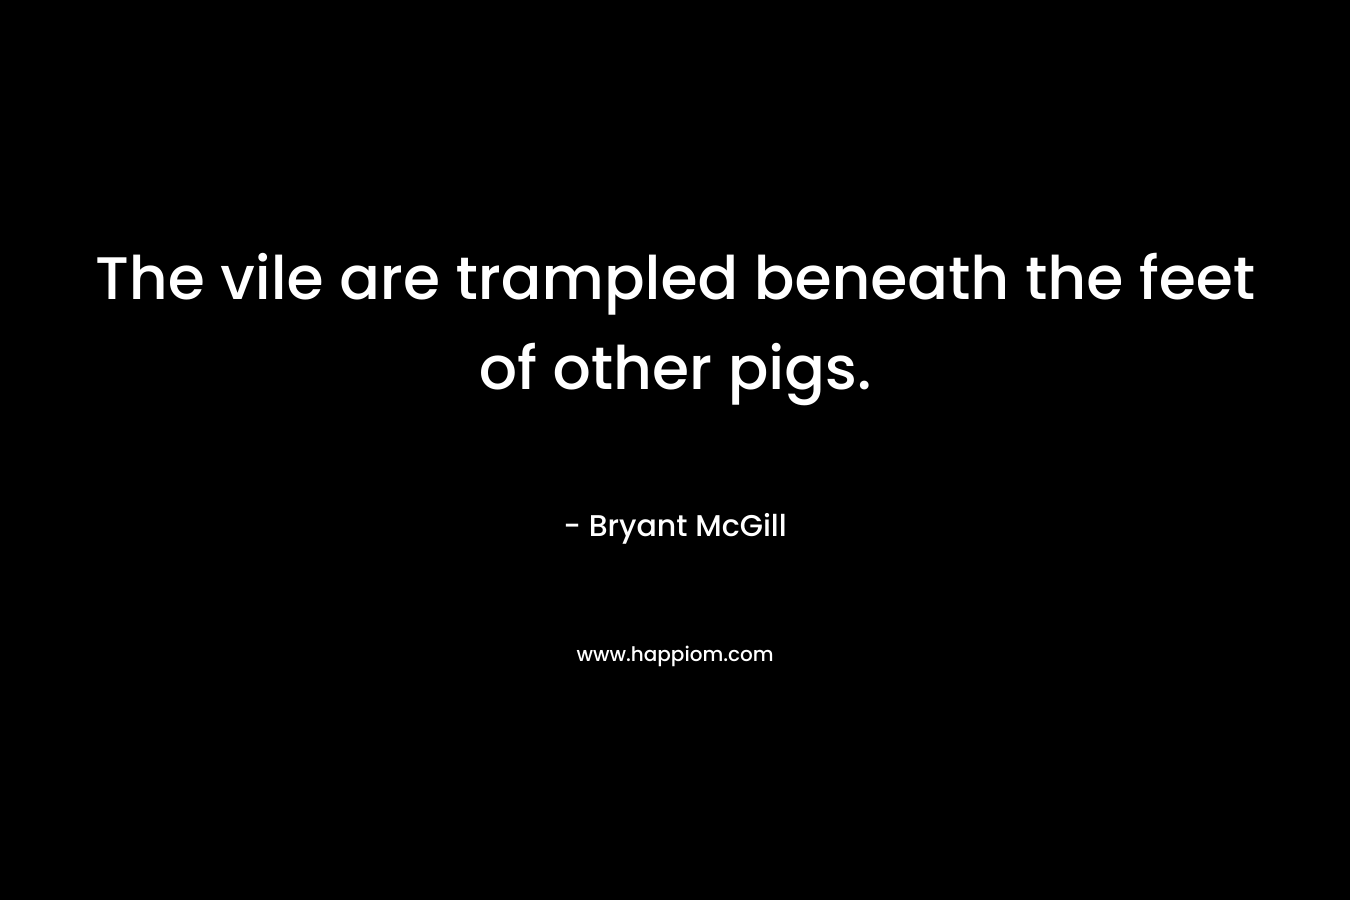 The vile are trampled beneath the feet of other pigs.